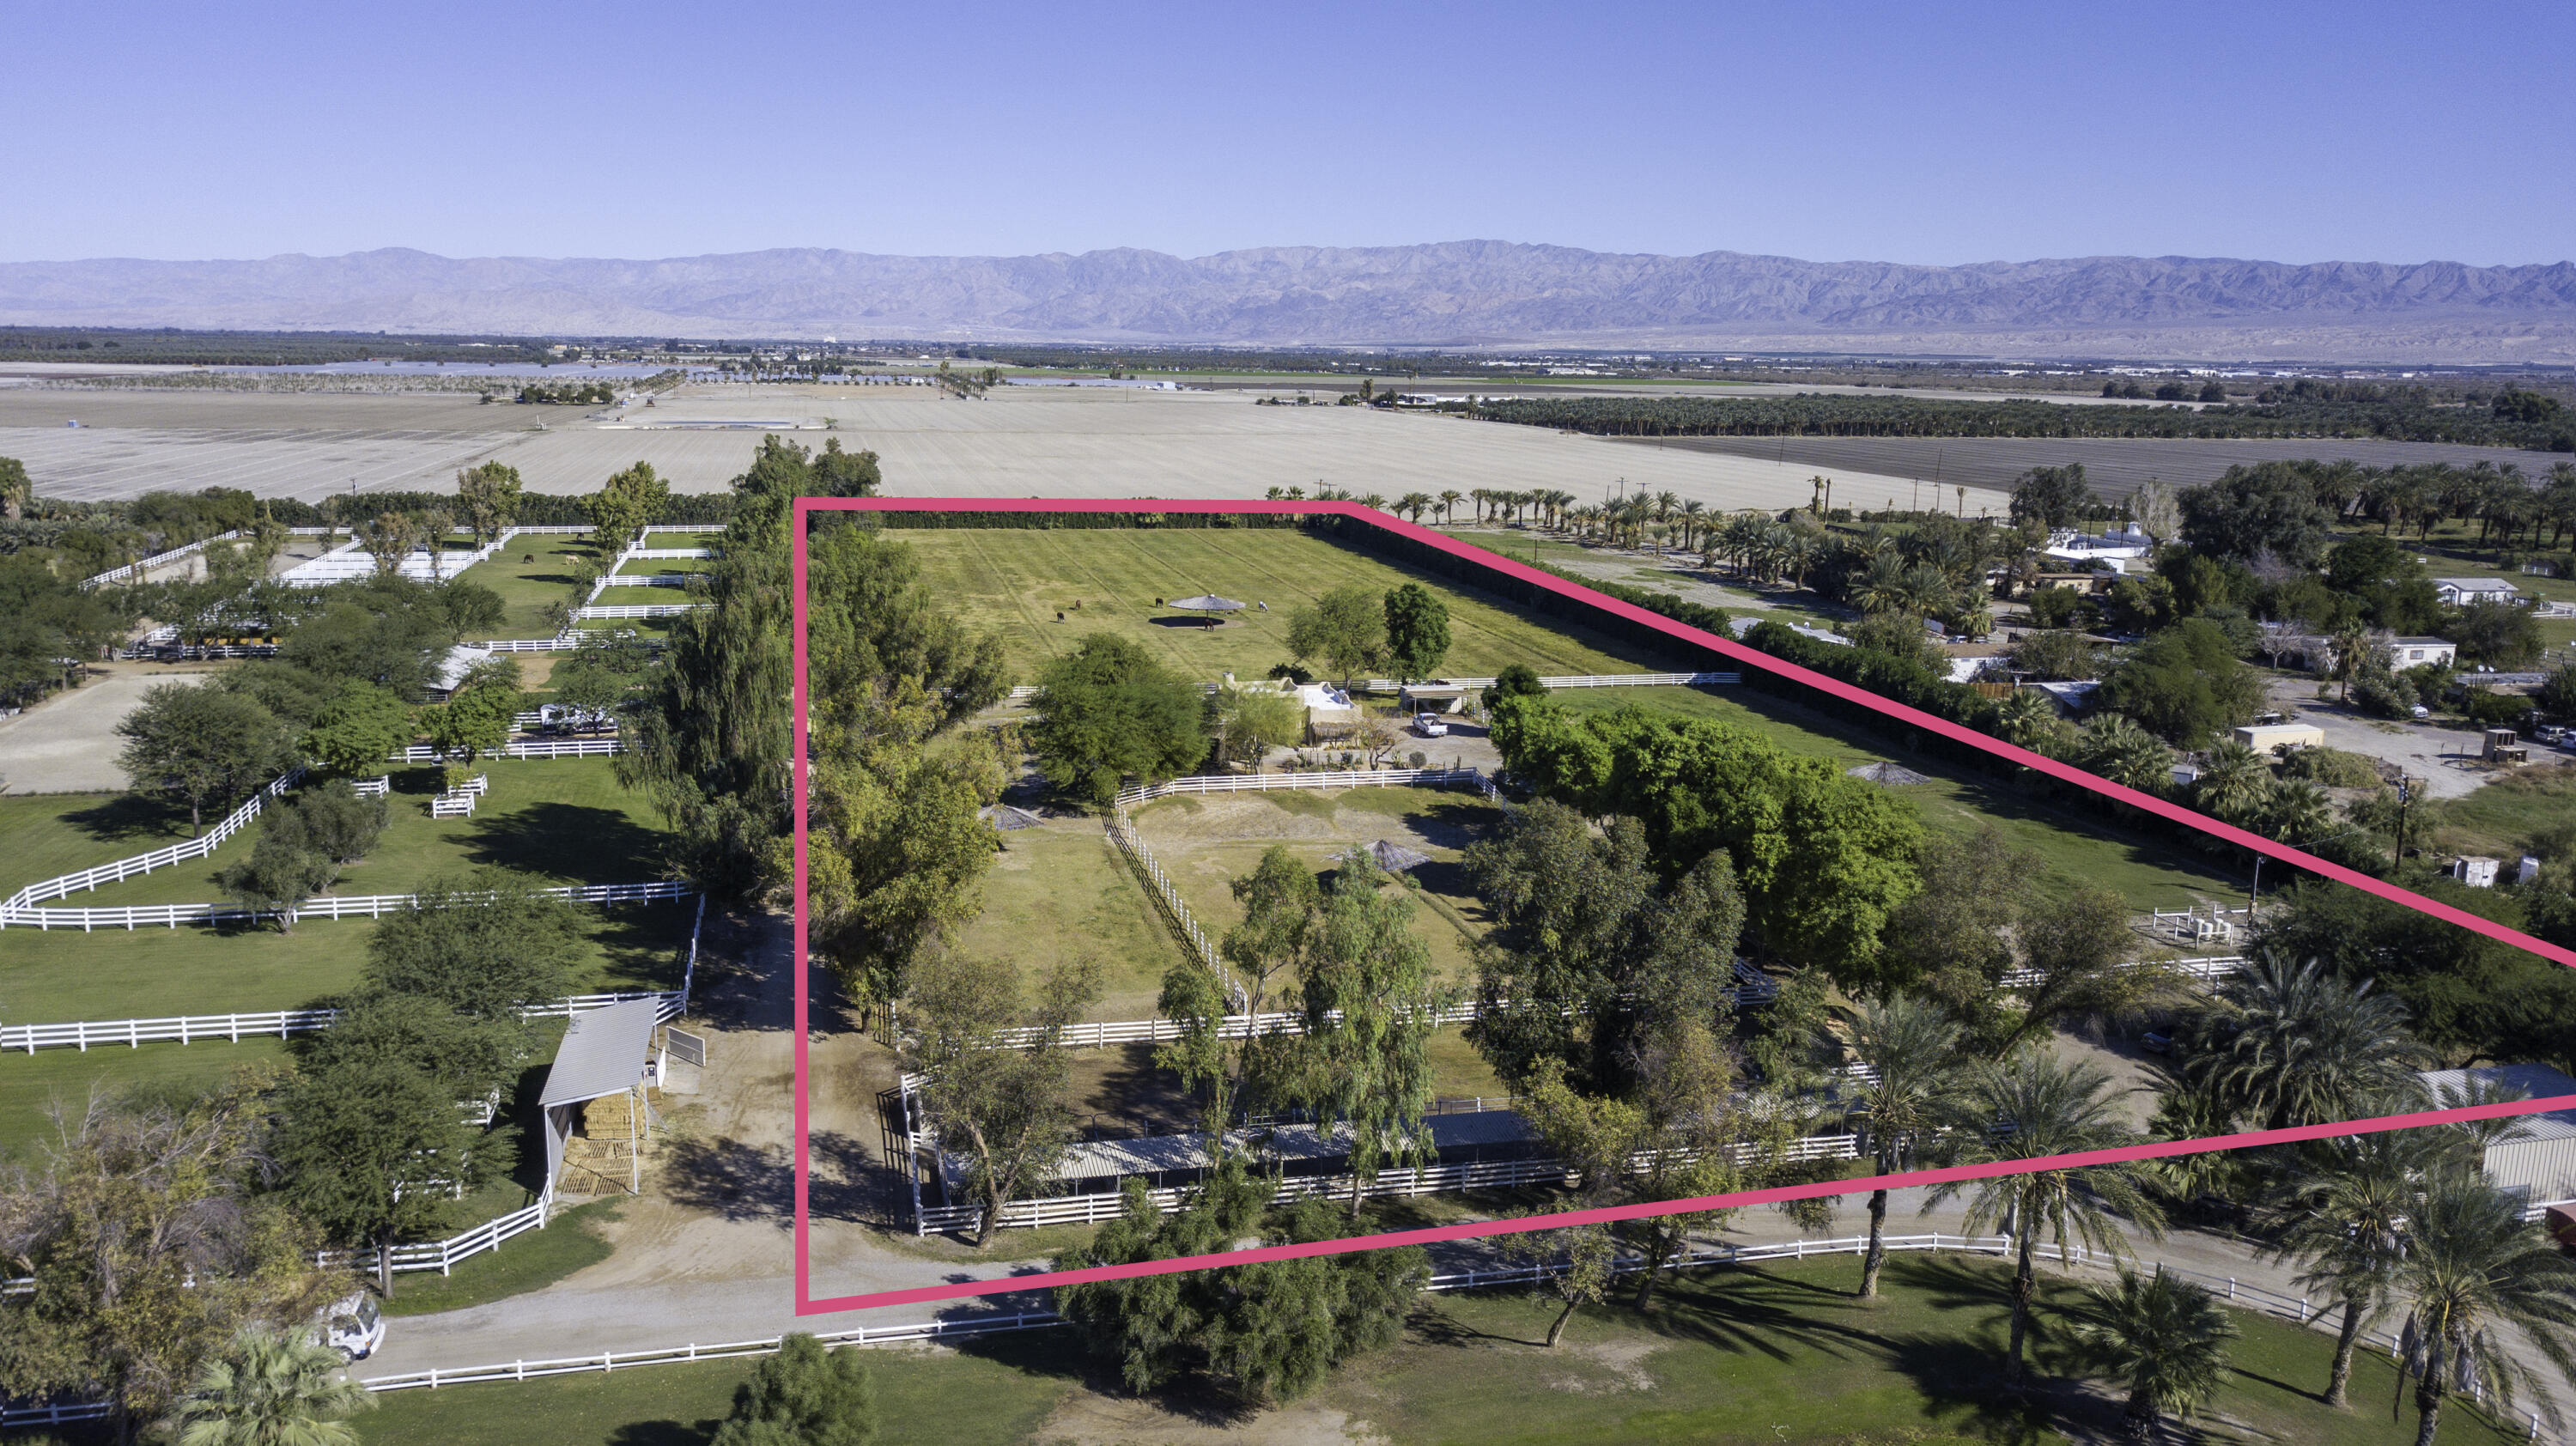 One of the best parcels in the gated, HOA community of Deer Creek in Thermal, CA.  Situated in the Eastern corner, this 10.3 acre farm has direct access to the field and track.  This parcel also shares a private driveway to Avenue 61 with the neighboring farm.  A 400 ft., tree lined driveway rises past the tack room and 7 stall barn area, to the elevated custom adobe style home in the middle of the farm.  Almost every room in the 2002 built home, looks over the pastures, all of which are fenced with 4-rail white Centaur fencing.  The home is approx. 1900 sf and has 2 bedrooms and 2.5 bathrooms in the main home plus a third bedroom/office under the carport.  There is an outdoor shower under the stars, and direct access to the main home's powder room from the third bedroom/office.  Saltillo tile floors, natural wood cabinets, a custom wood burning fireplace, art niches, and spectacular views over the grass pastures.  25 horses can live here comfortably!  A private well, and CVWD Ag water for pasture irrigation assure plentiful grass.  HOA ($900/month), includes reservoir, track and field maintenance, 2 playing tickets and management, water and manure removal.